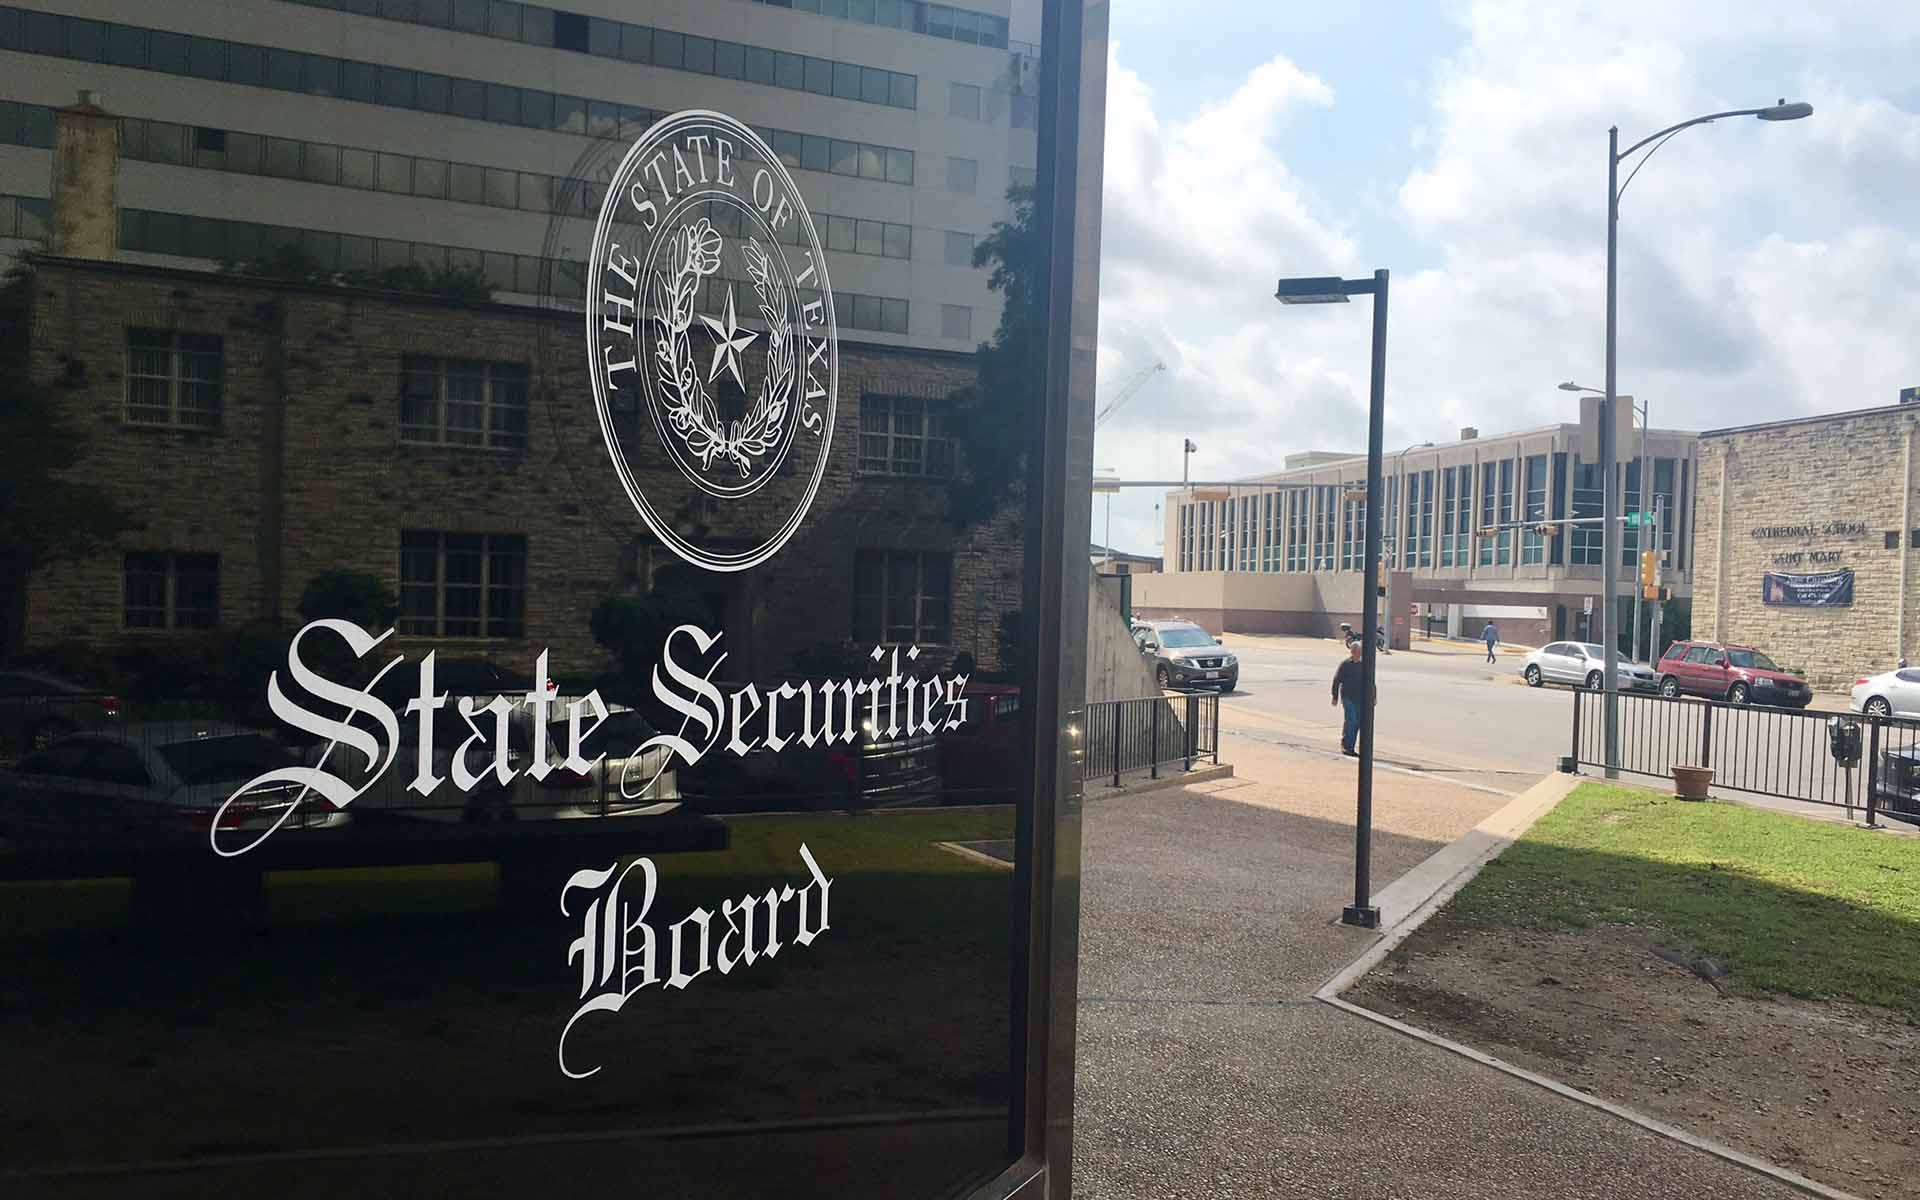 The Texas State Securities Board